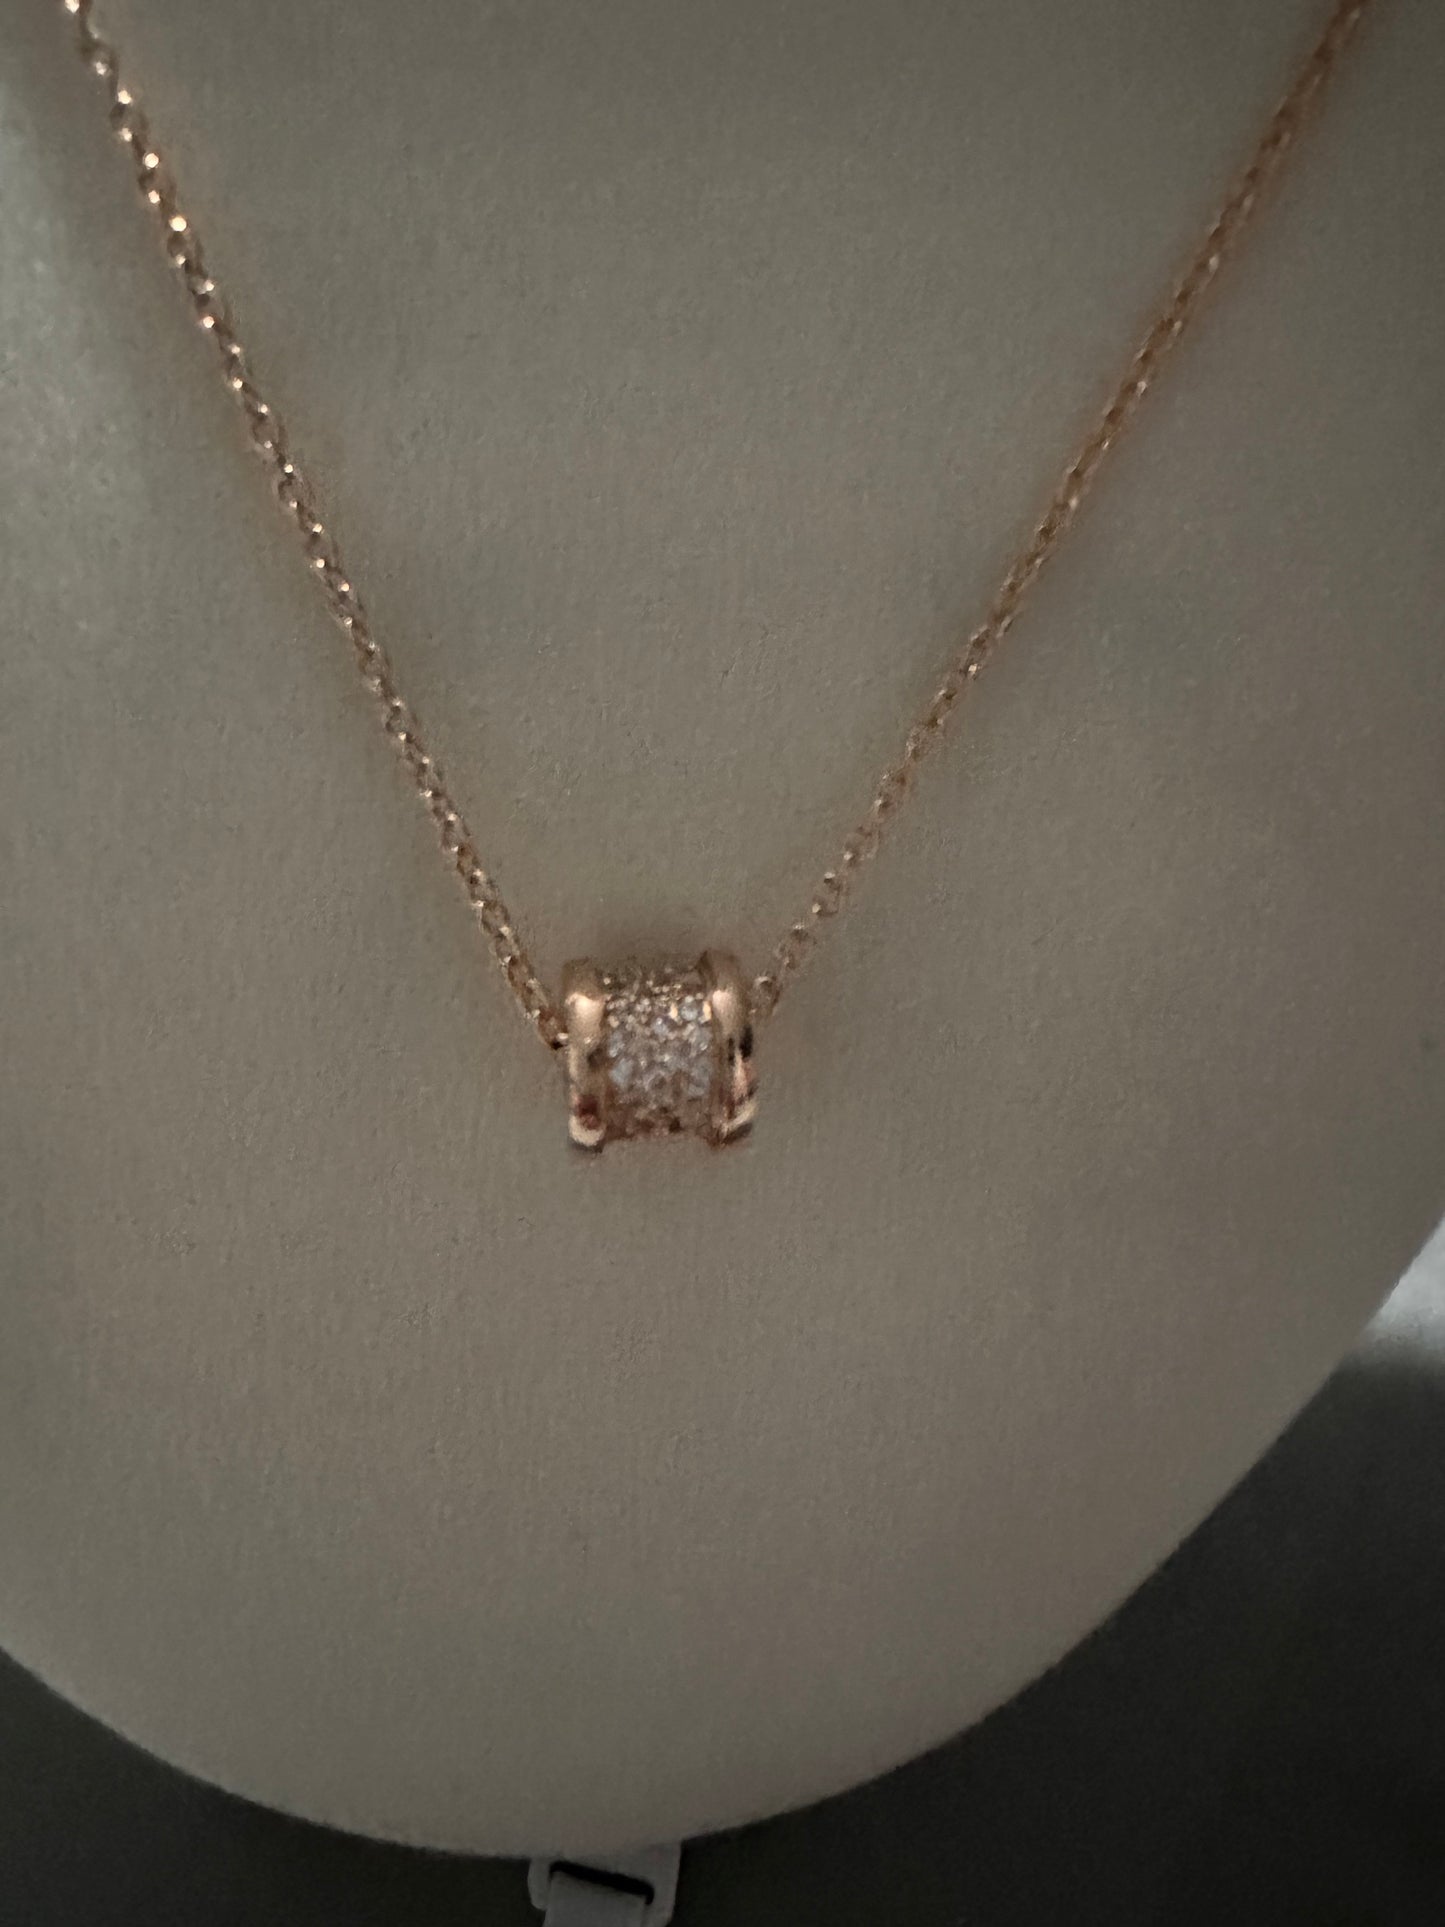 Lgari Small Ring necklace with CZ Silver or Rose-Gold